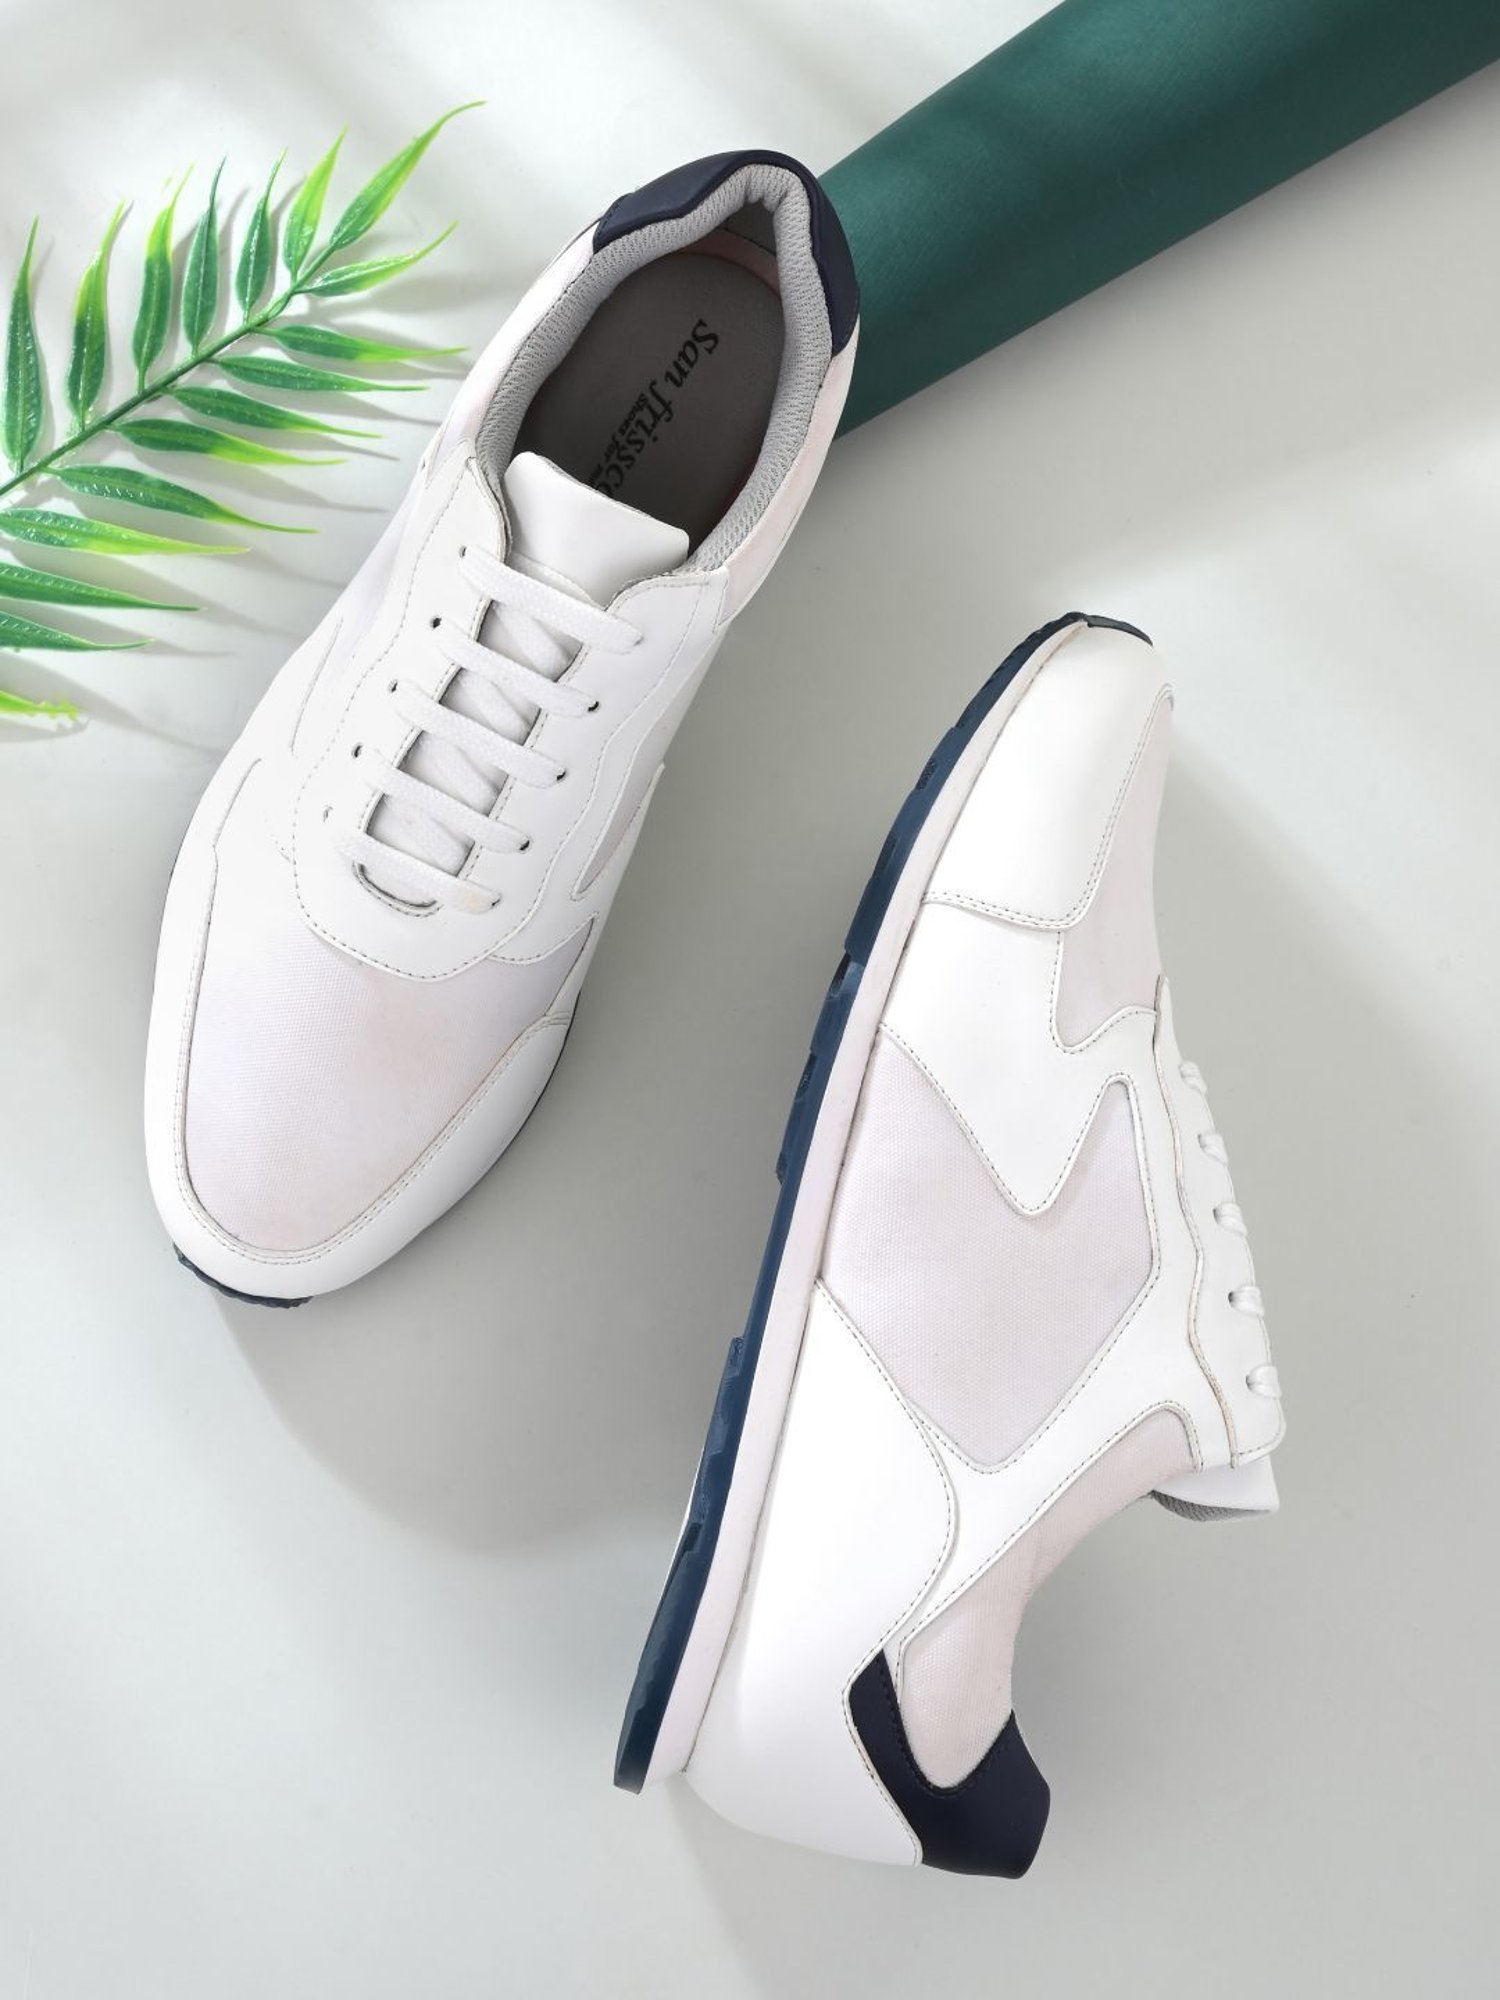 The Roadster Lifestyle Co Men White Sneakers